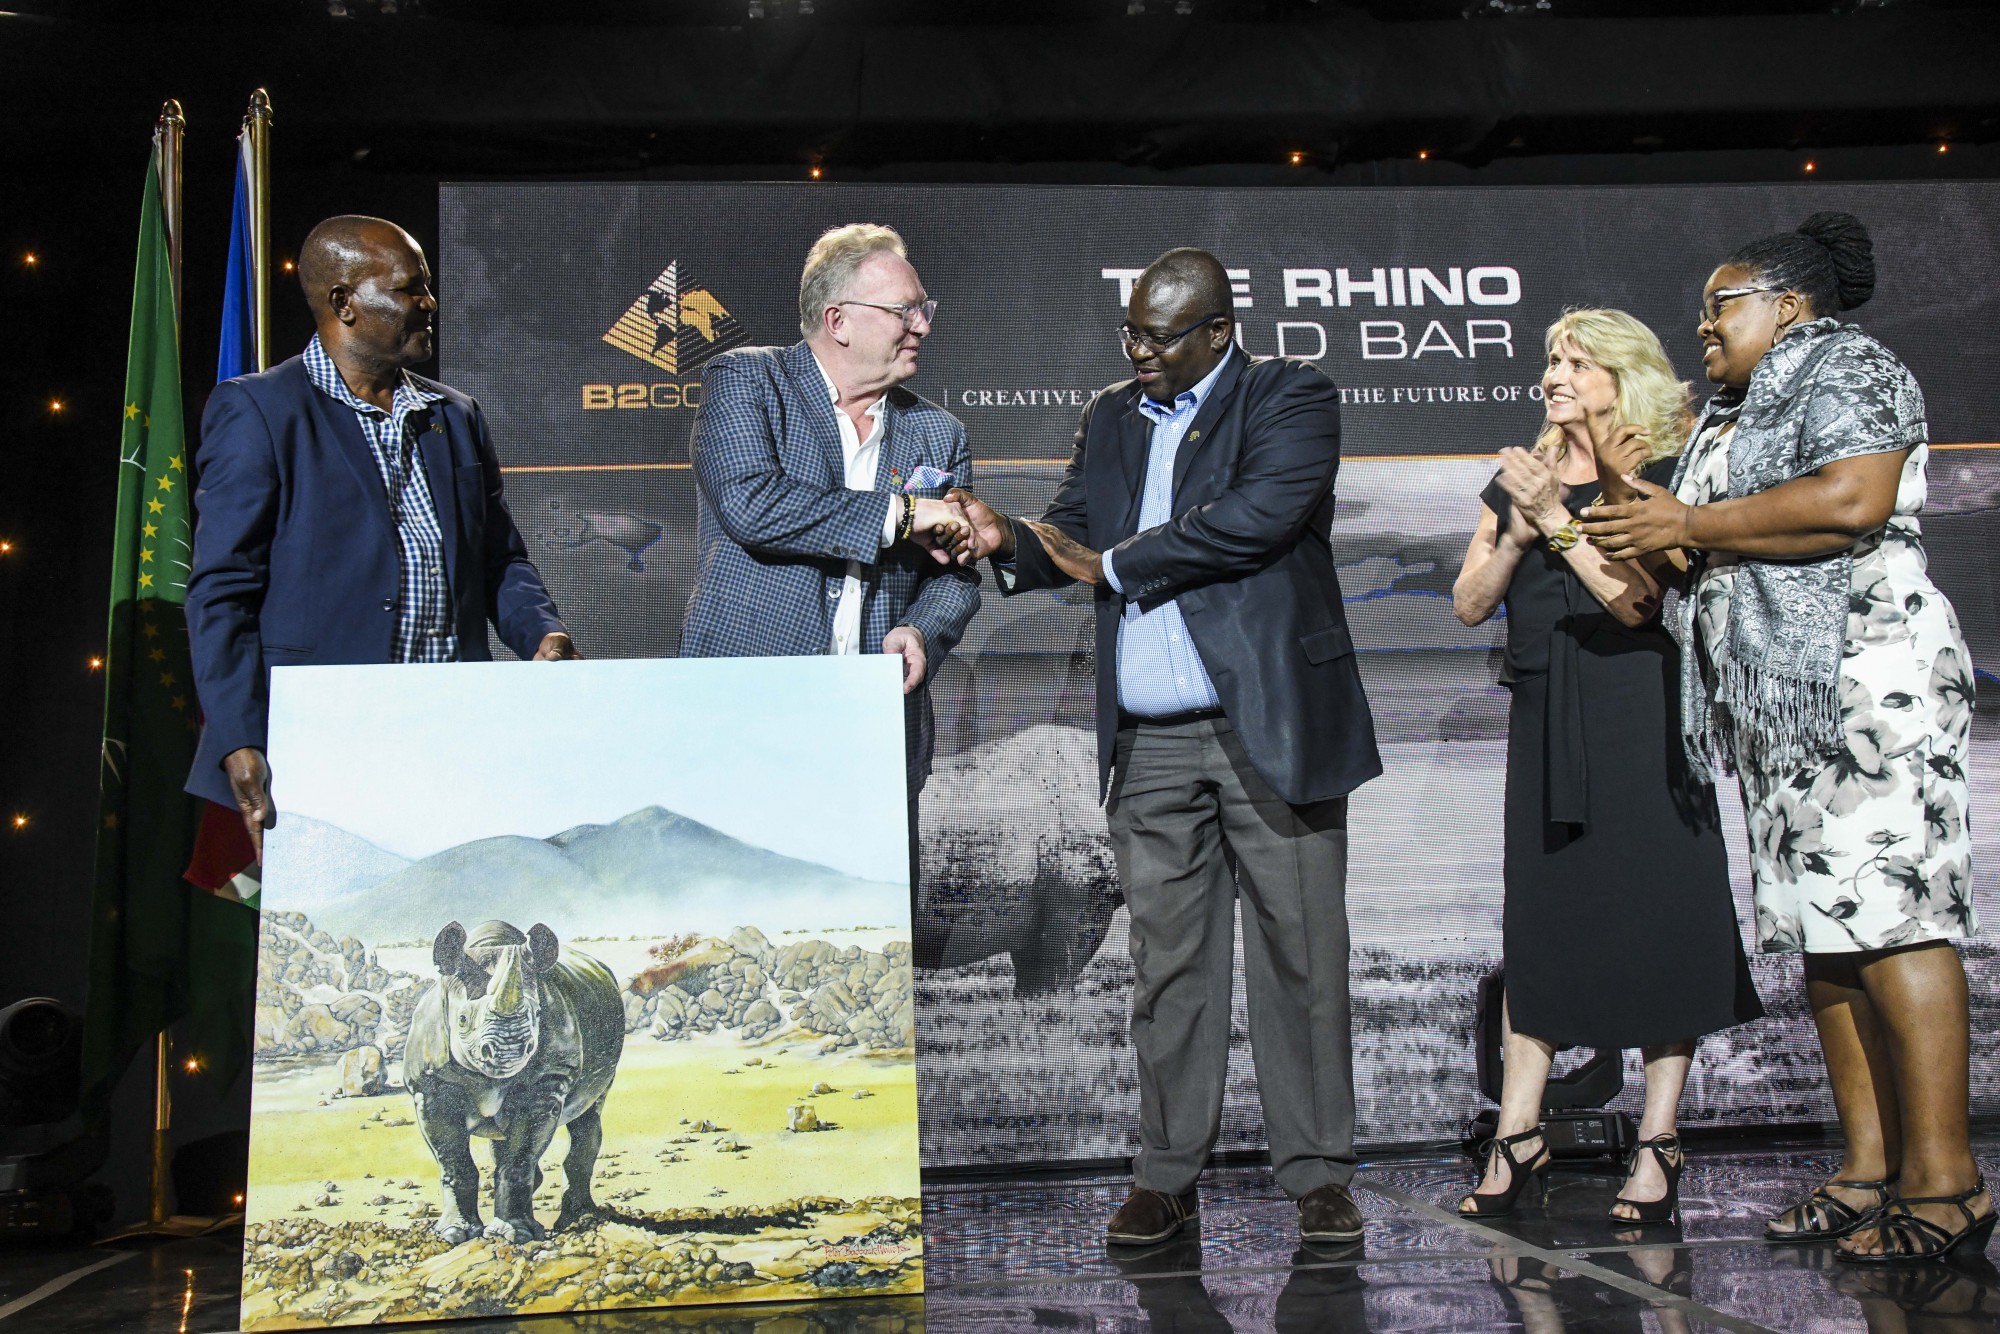 Members from Save the Rhino Trust “SRT” and Integrated Rural Development and Nature Conservation “IRDNC” presenting a token of their appreciation to Clive Johnson (President, CEO & Director, B2Gold Corp.).  From left to right: Simson Uri-Khob (CEO, SRT), Clive Johnson, John Kasaona (Executive Director, IRDNC), Ginger Mauney (Director, SRT) and Maxi Louis (Board of Trustees Chairperson, SRT)